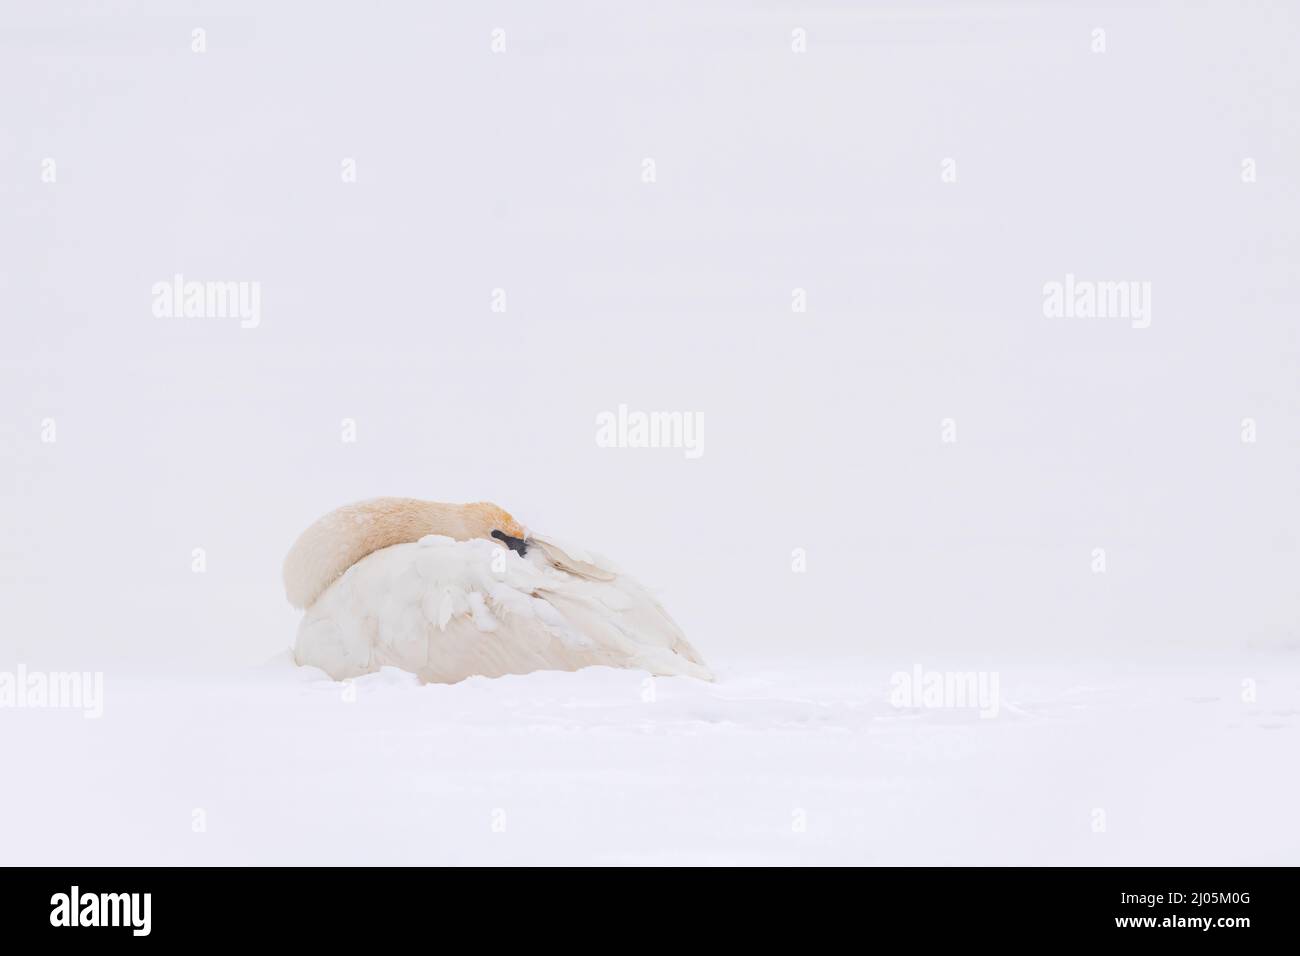 Trumpeter swan (Cygnus buccinator), resting on ice, St. Croix river, Winter, Wisconsin, USA, by Dominique Braud/Dembinsky Photo Assoc Stock Photo